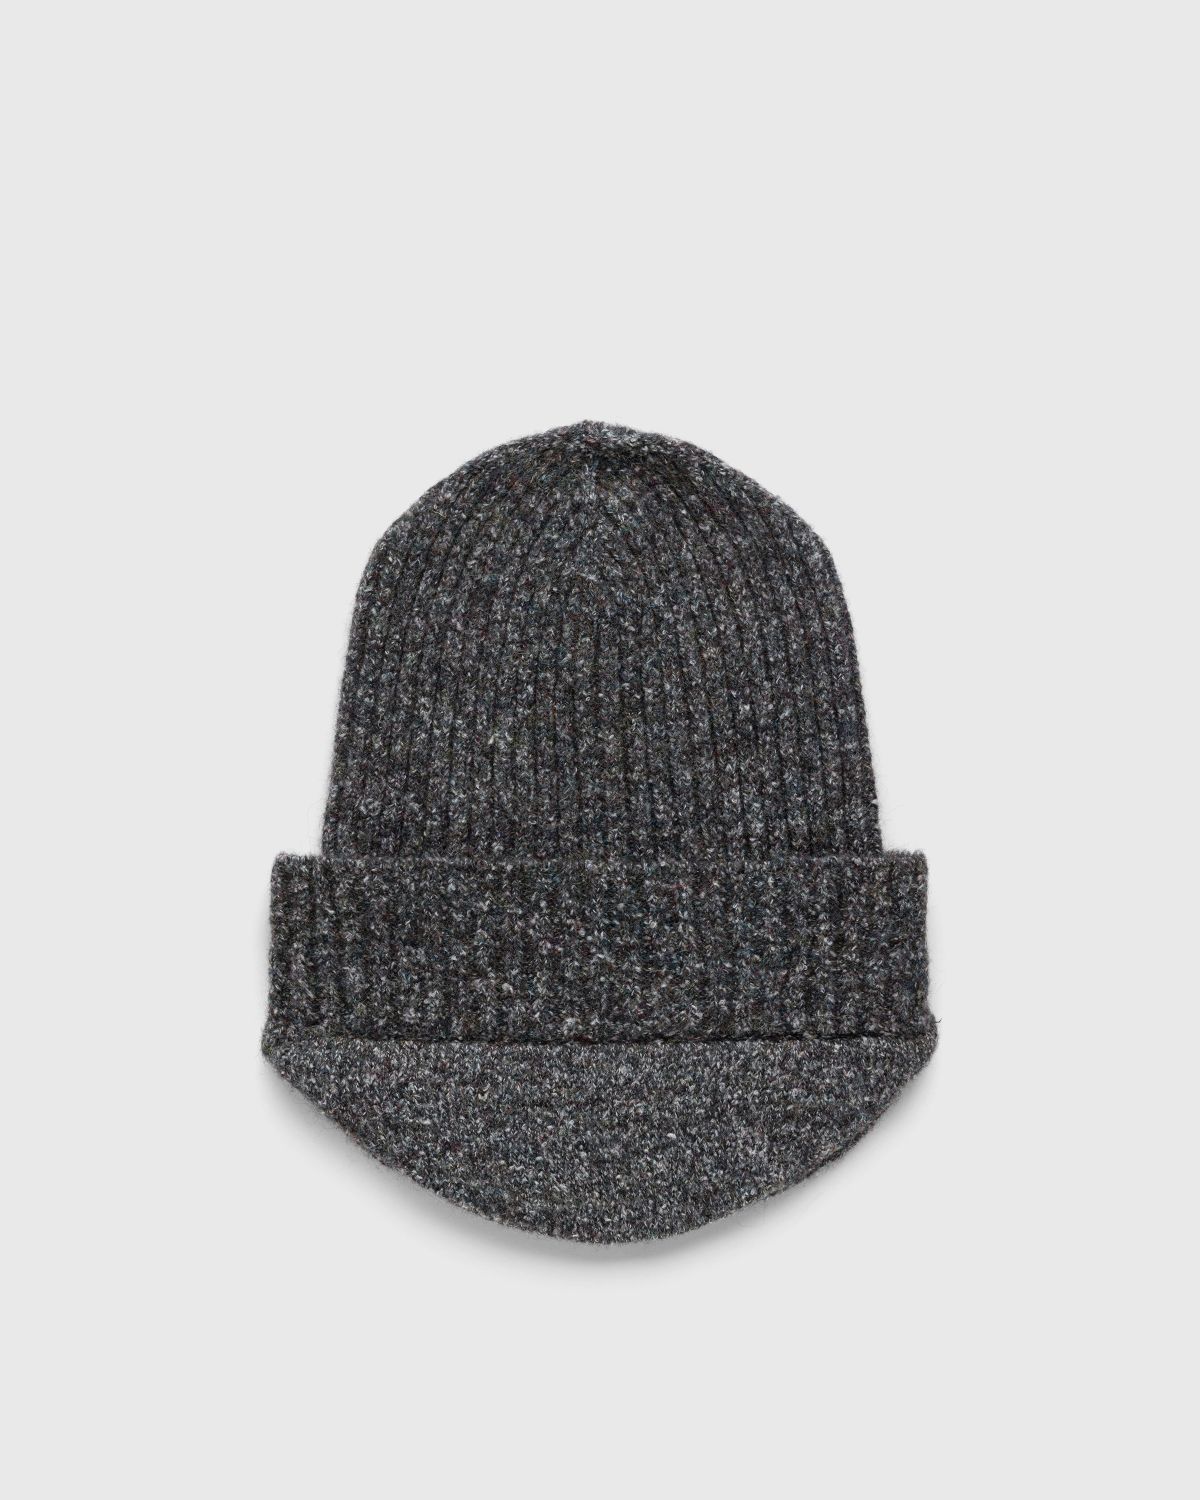 RANRA – Der Beanie Frosted Charcoal - Beanies - Grey - Image 1